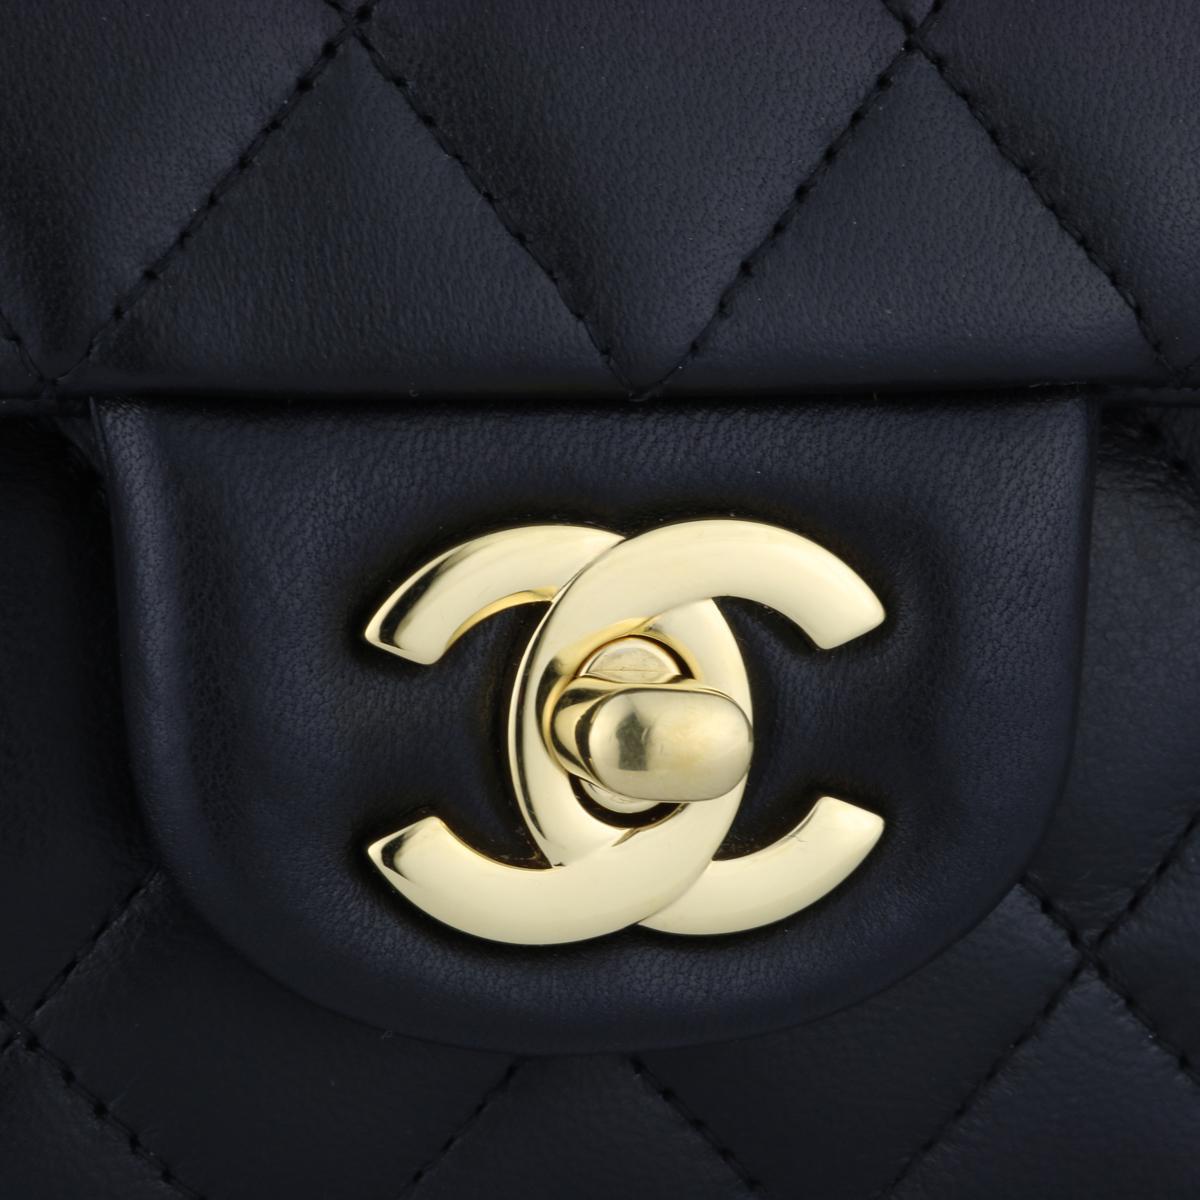 Authentic CHANEL Classic Double Flap Bag Medium Black Lambskin with Gold Hardware 2016.

This stunning bag is still in mint condition, the bag still holds its original shape, and the hardware is very shiny. Leather still smells fresh as if